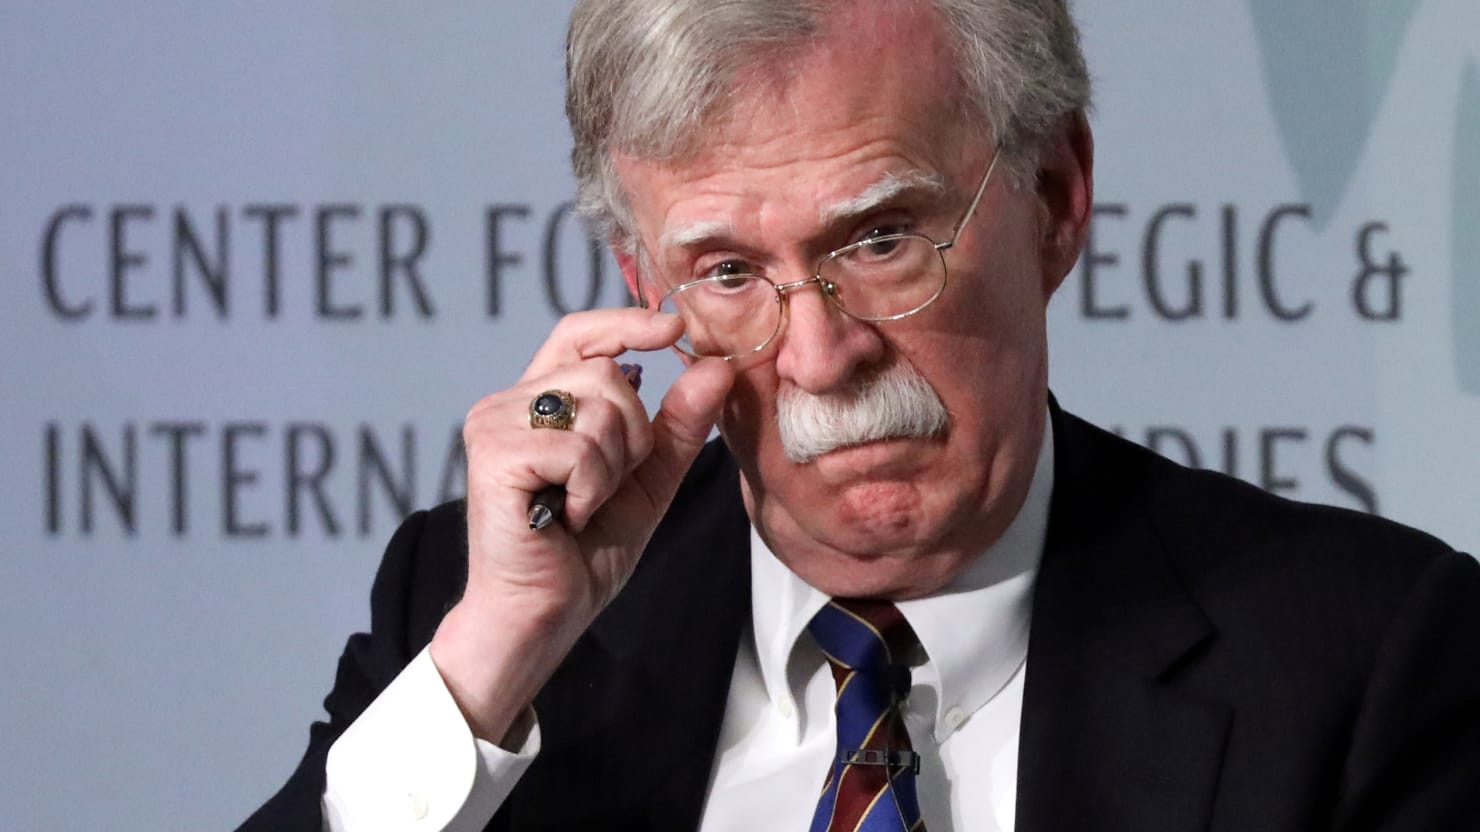 John Bolton S Book Named Room Where It Happened After Hamilton Anthem Of Corruption